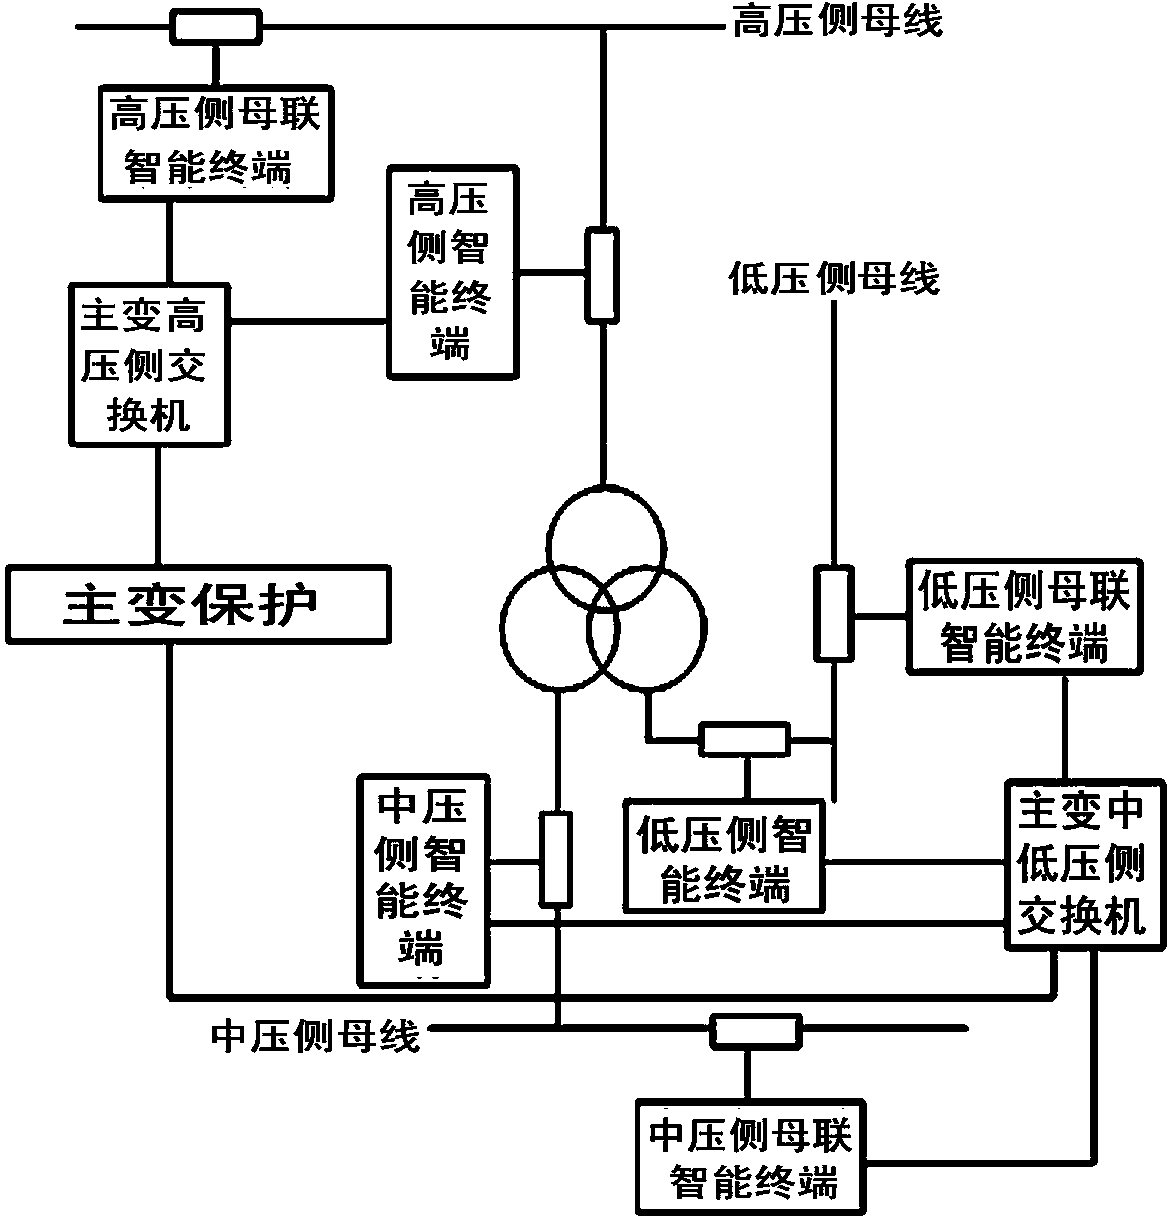 Cross-interval shared information-based method for main-transformer backup protection accelerated tripping operation based on